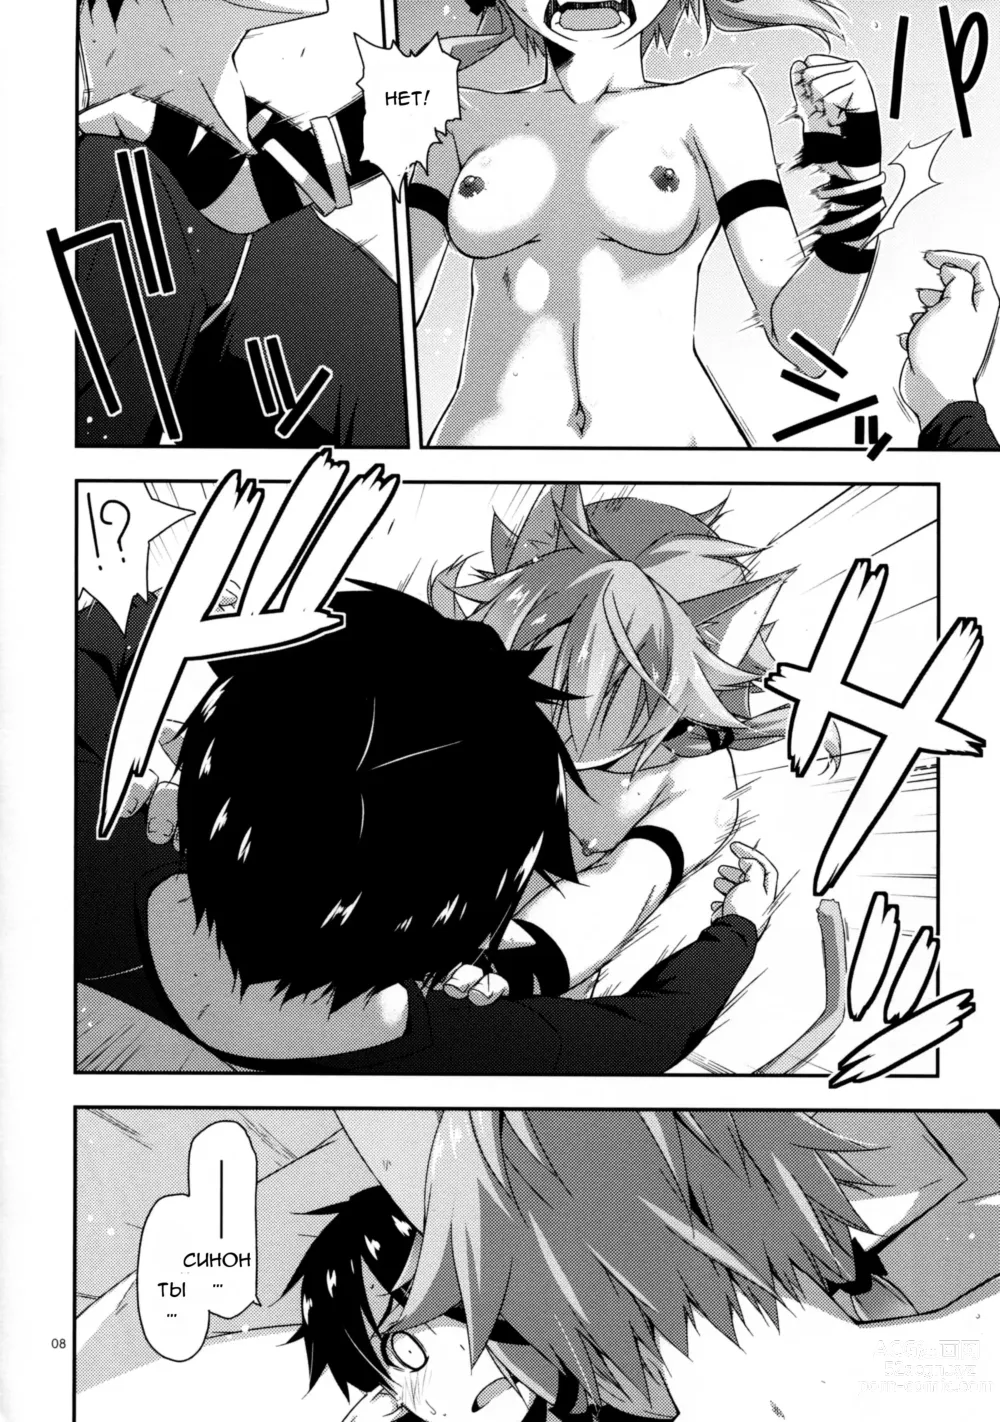 Page 8 of doujinshi Case closed.